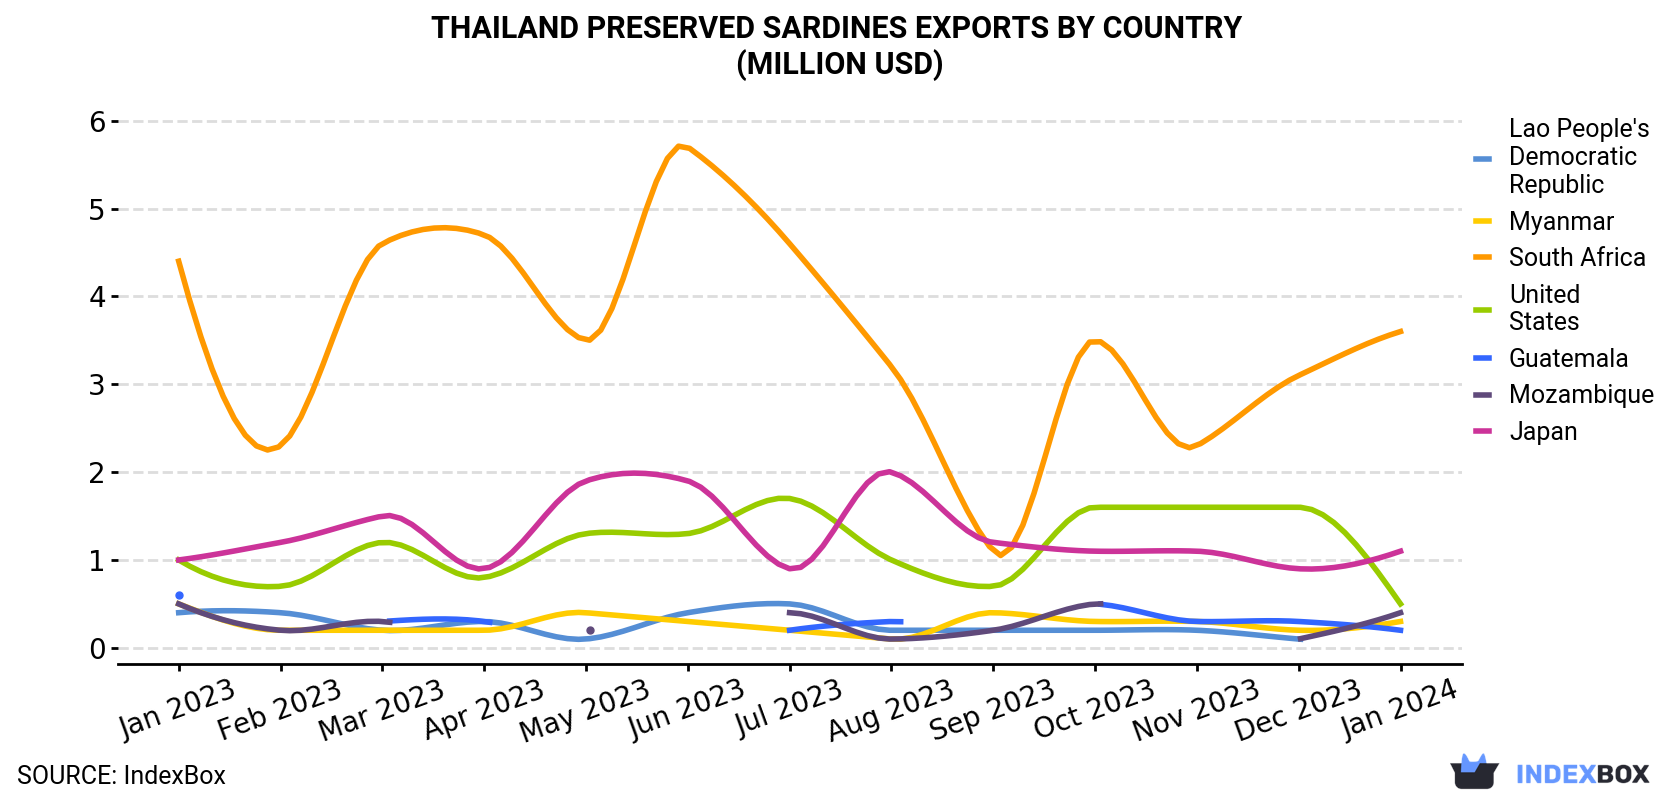 Thailand Preserved Sardines Exports By Country (Million USD)